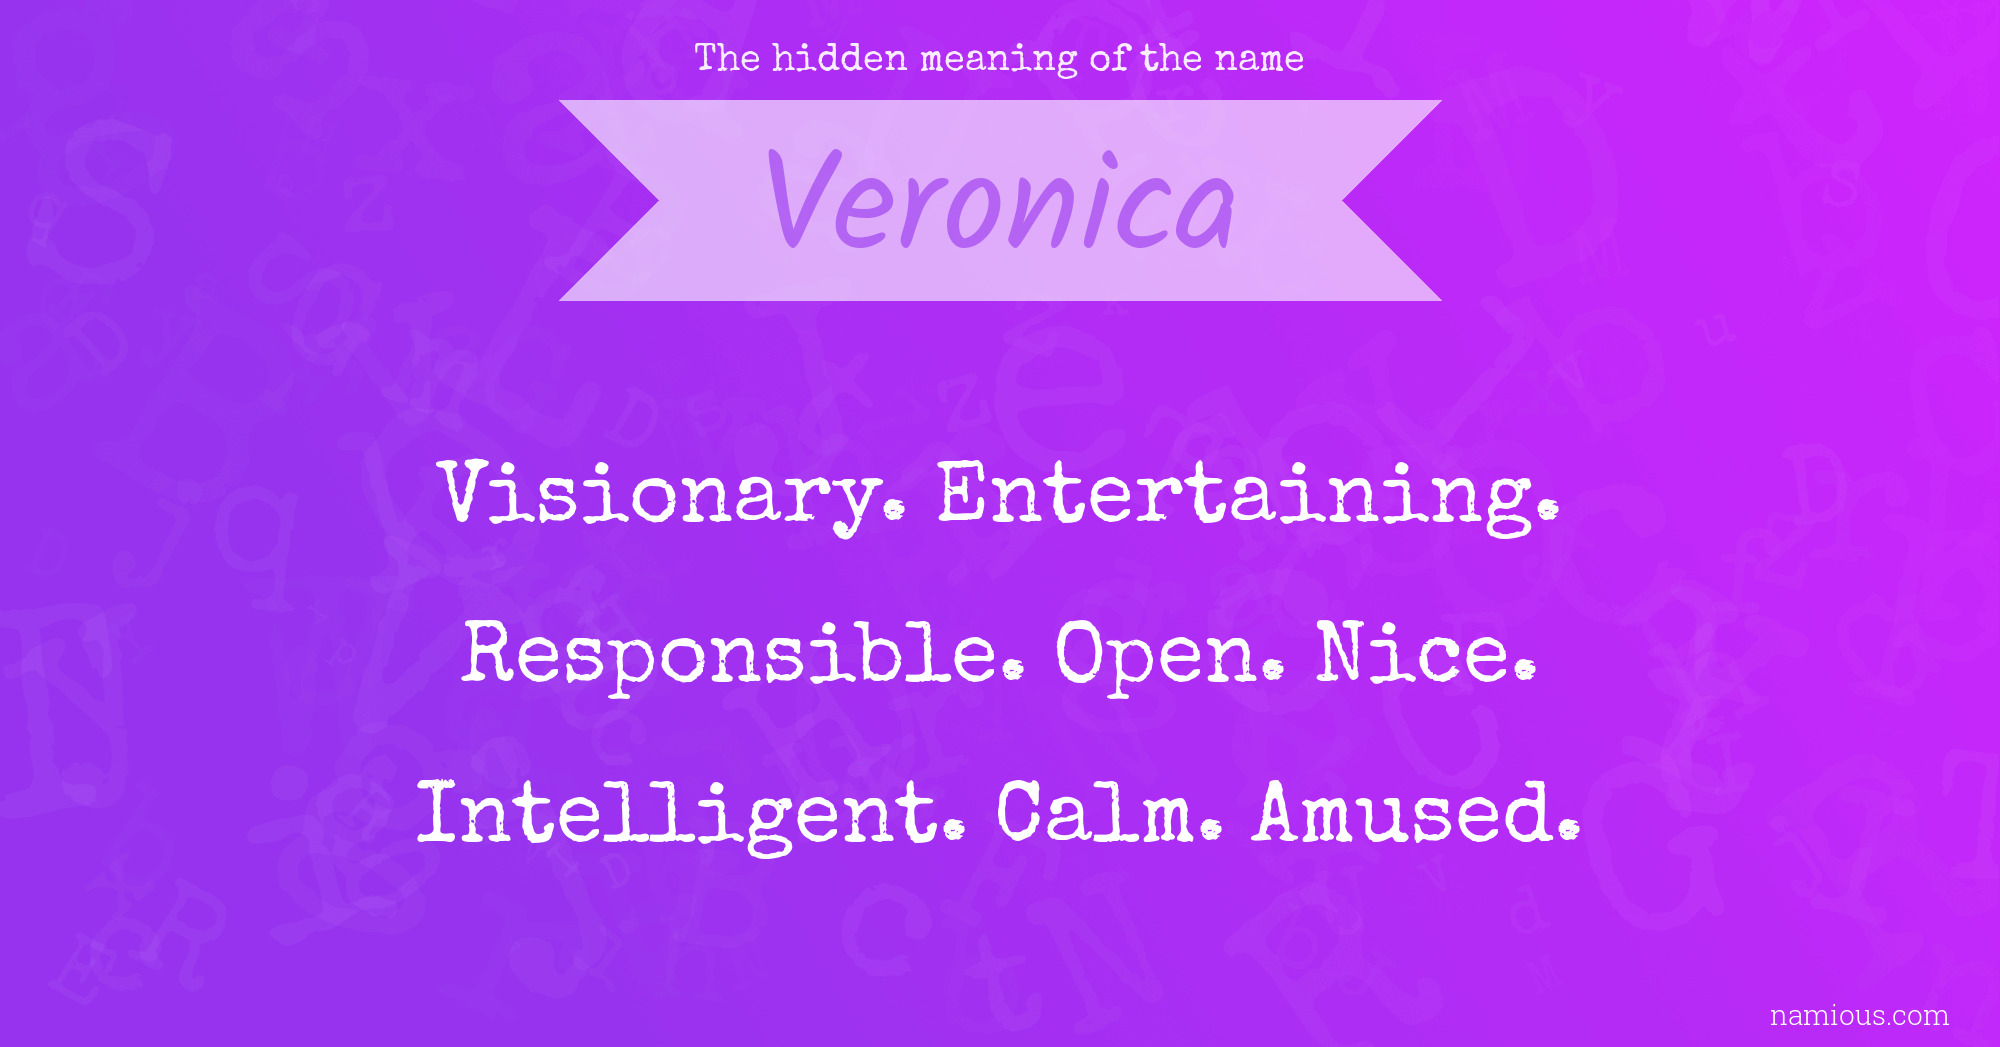 The hidden meaning of the name Veronica